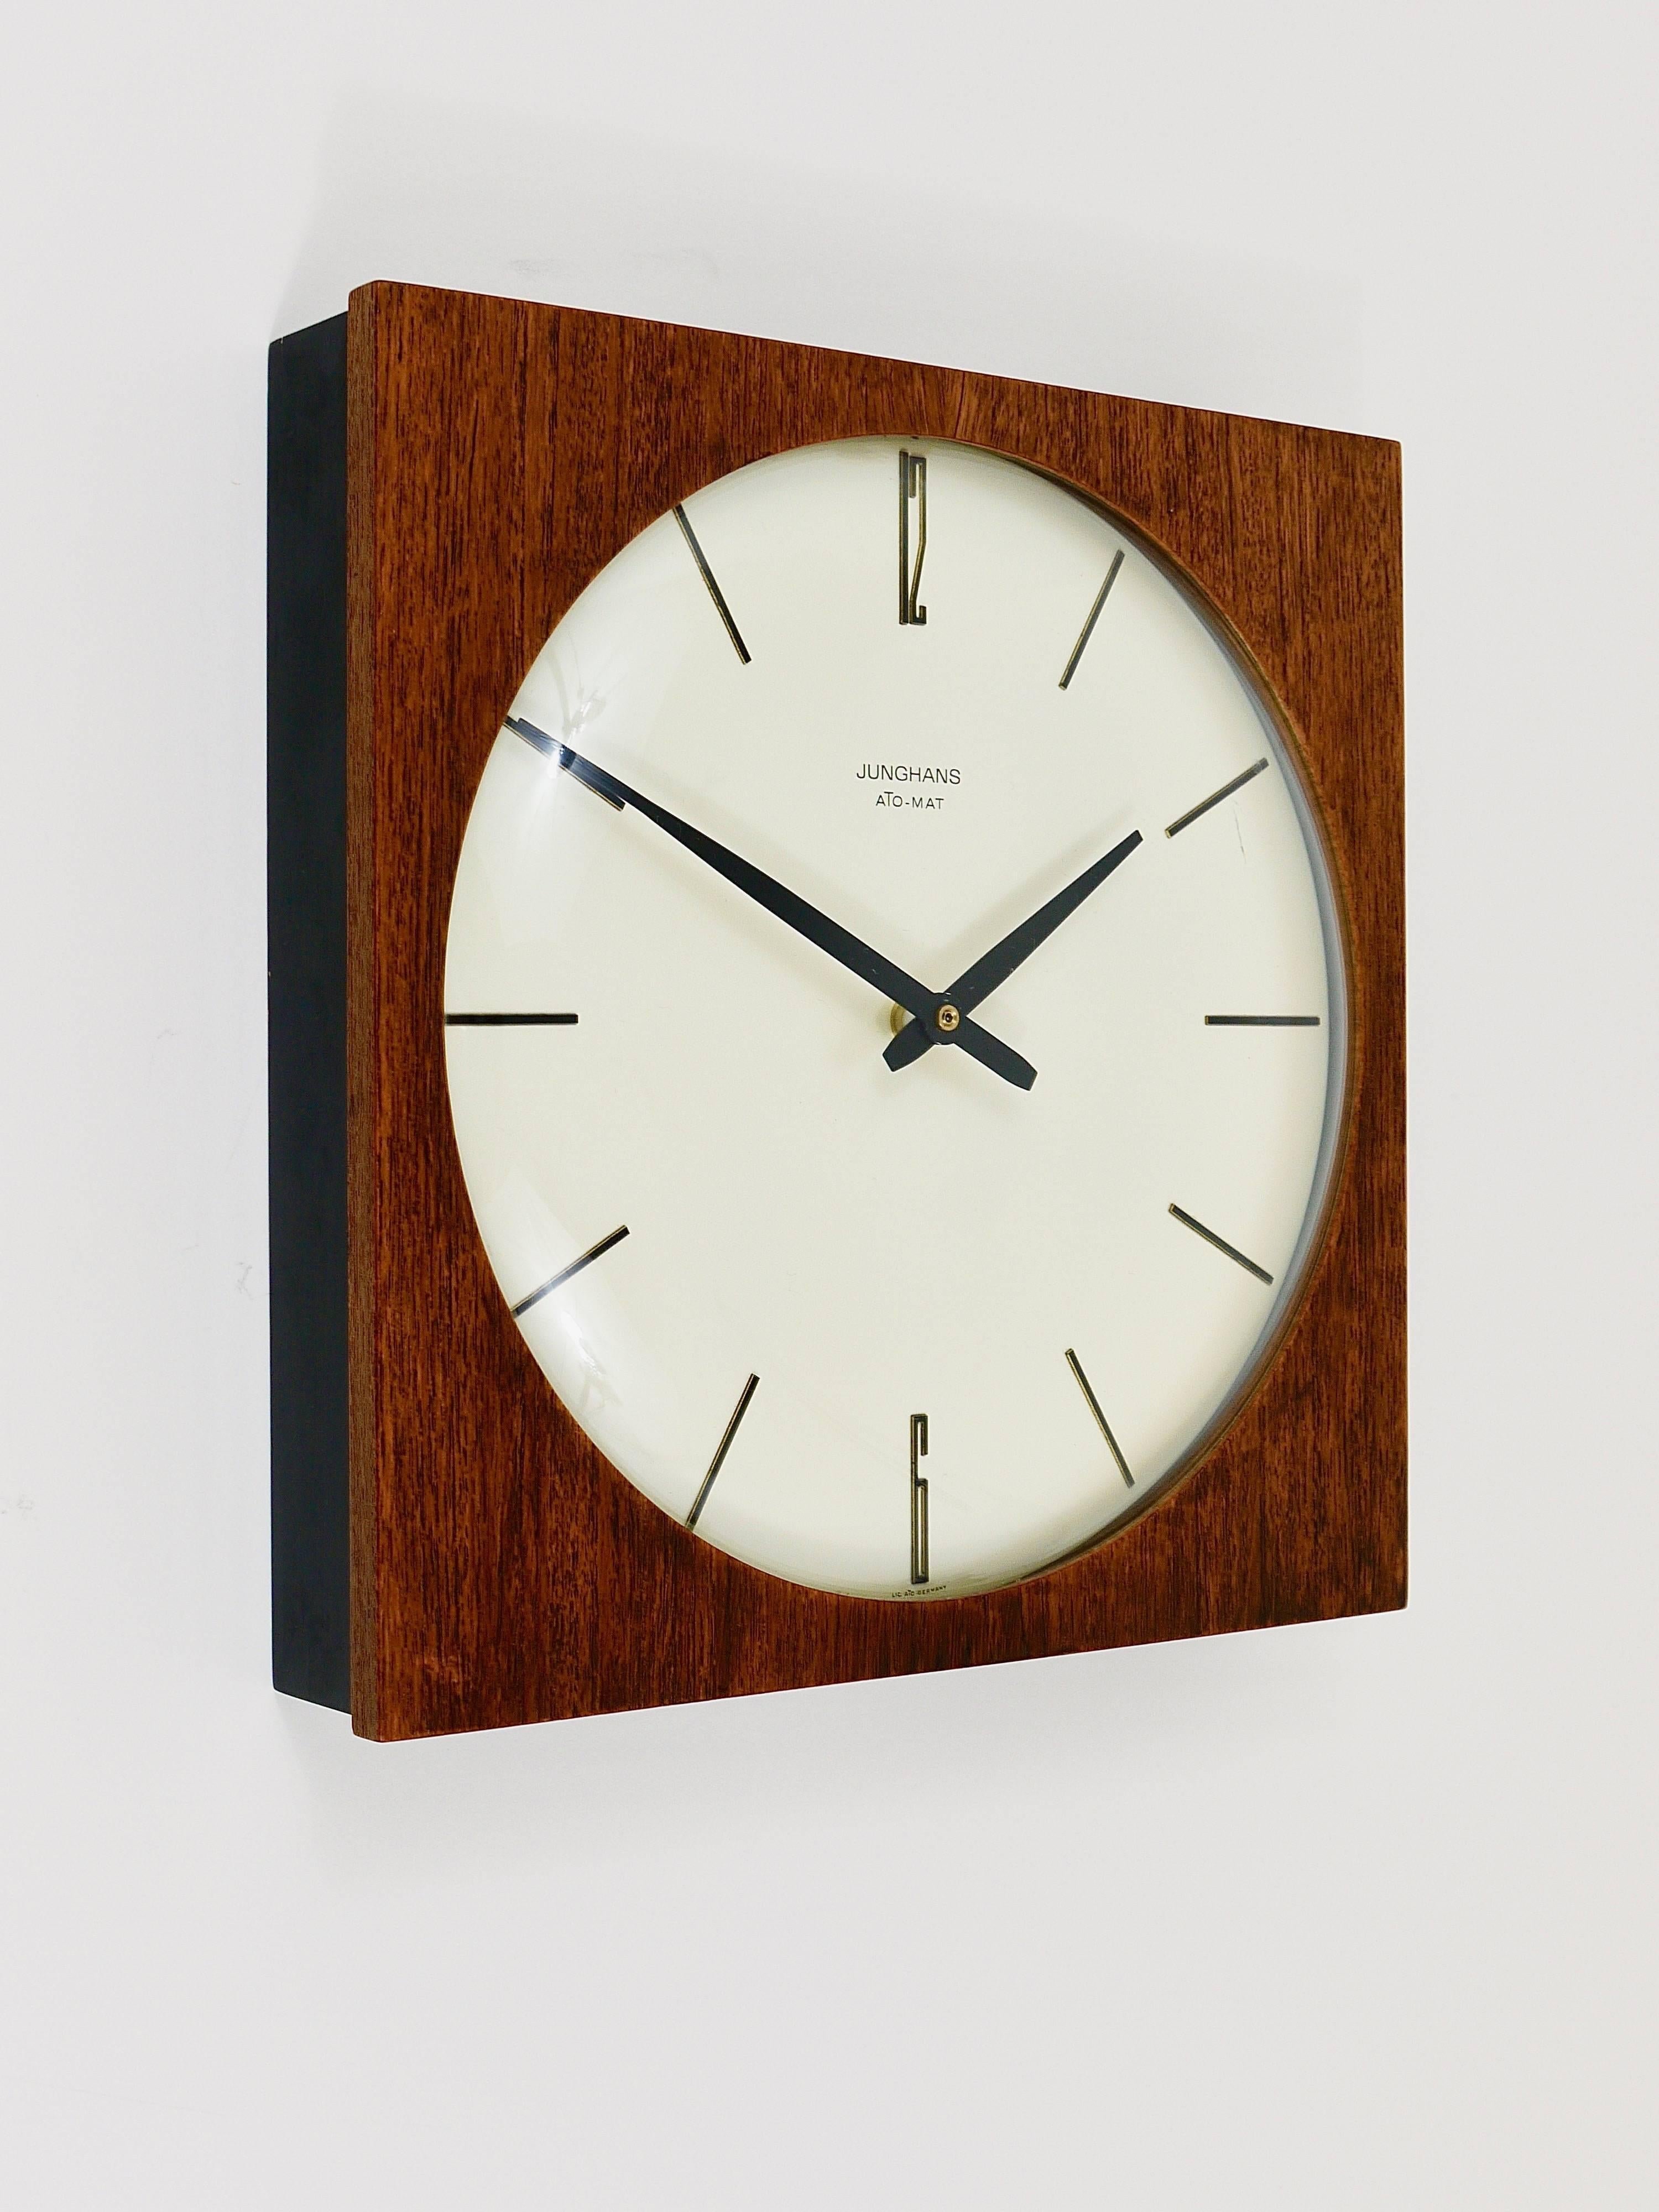 A square modernist wall clock in the style of Max Bill, executed in the 1950s by Junghans Germany. A beautiful piece with a square black and teak wood housing, a nice clocks face and handles and a domed glass. Powered by a quartz movement with a